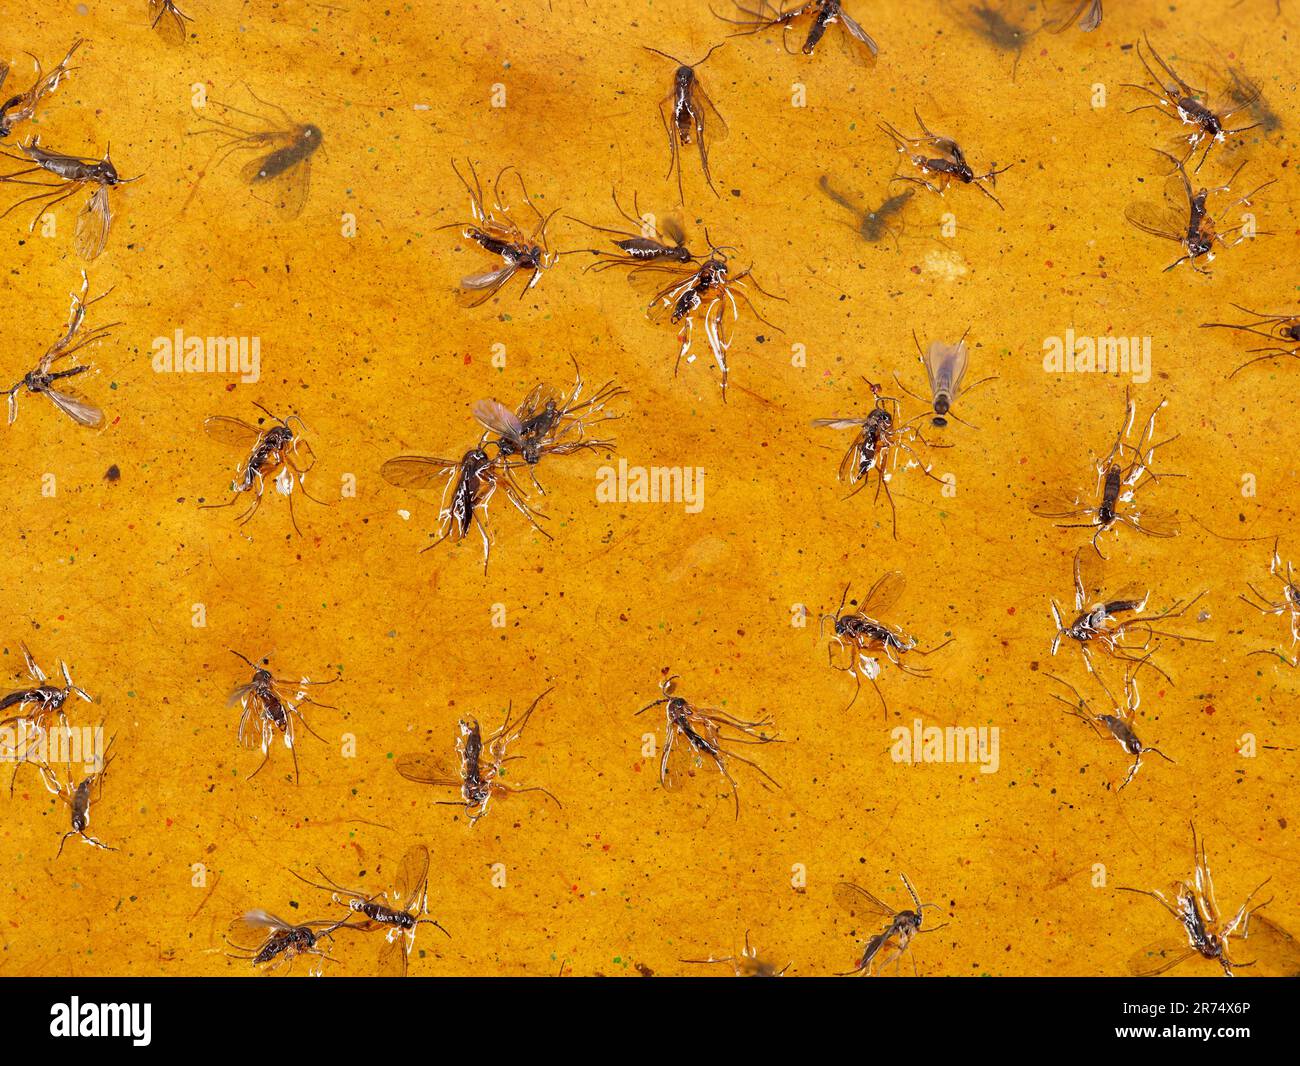 https://c8.alamy.com/comp/2R74X6P/close-up-of-various-small-flies-stuck-on-a-yellow-sticky-flytrap-2R74X6P.jpg